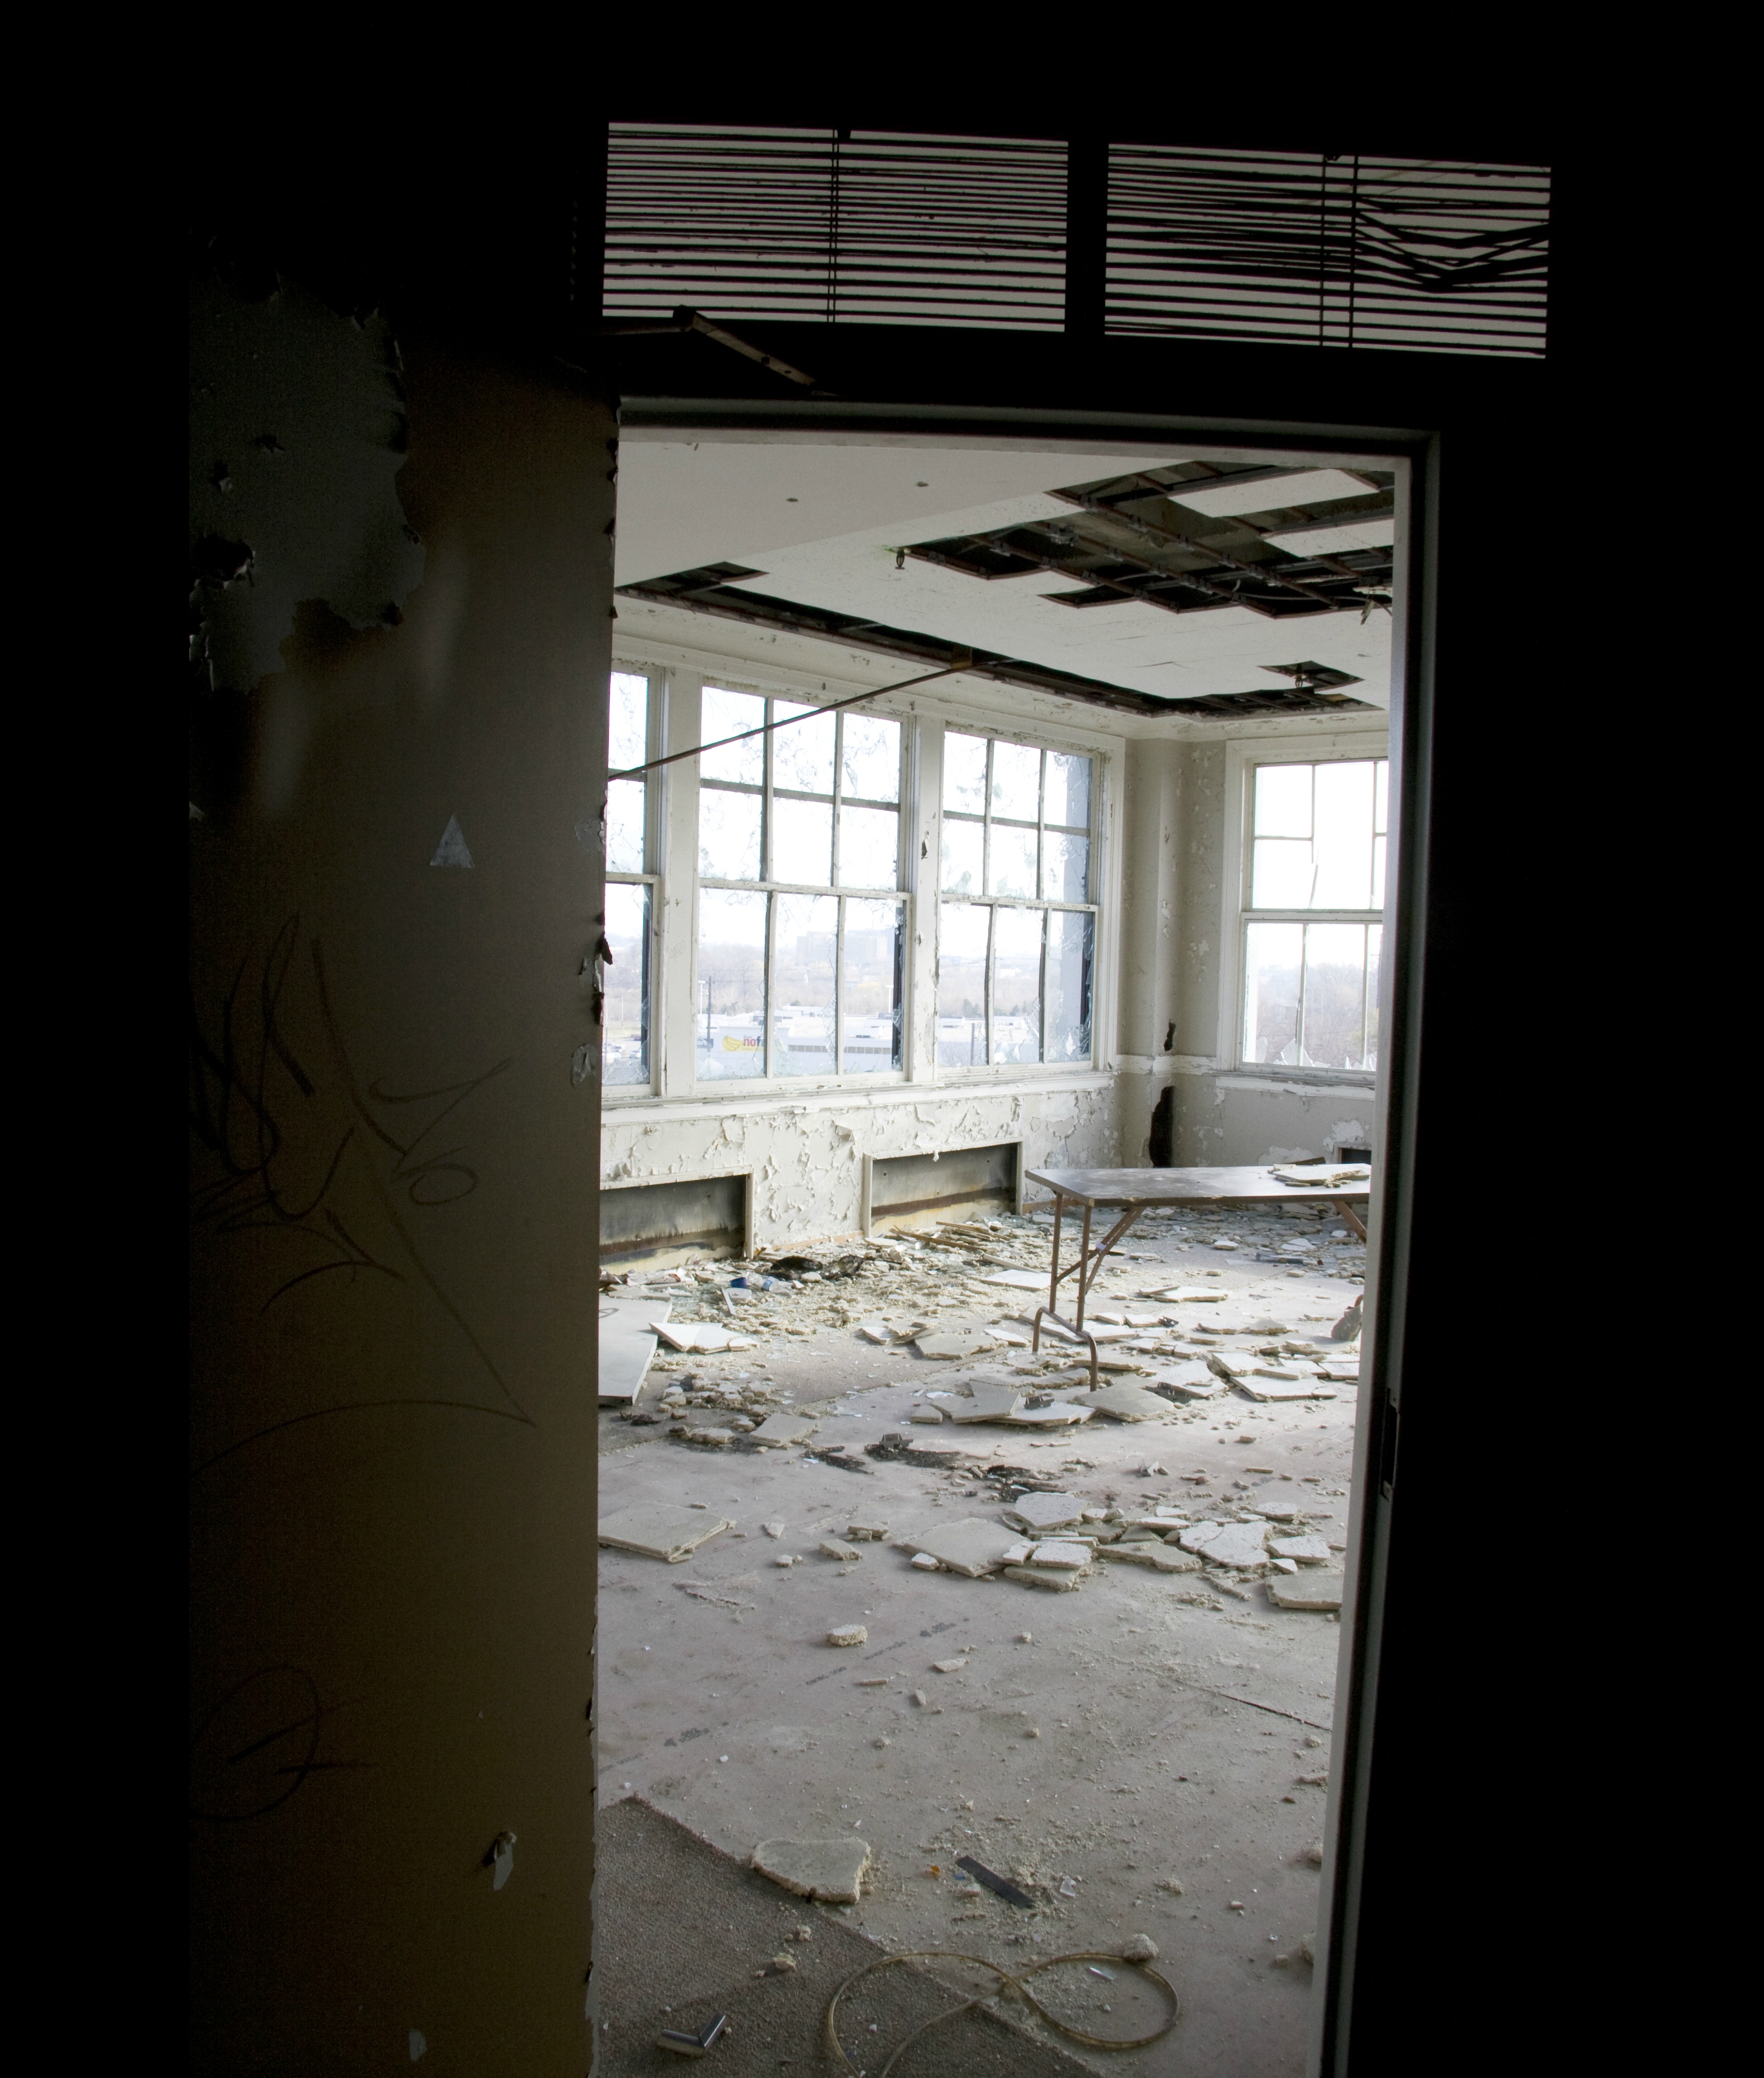 VIEW TO THE ROOM - after emerging from the darkness, colours began to show. Yellowed, peeling paint, dusty white debris from crumbling ceiling tiles and flashing fragments of glass painted a dreary picture of the building's interior.